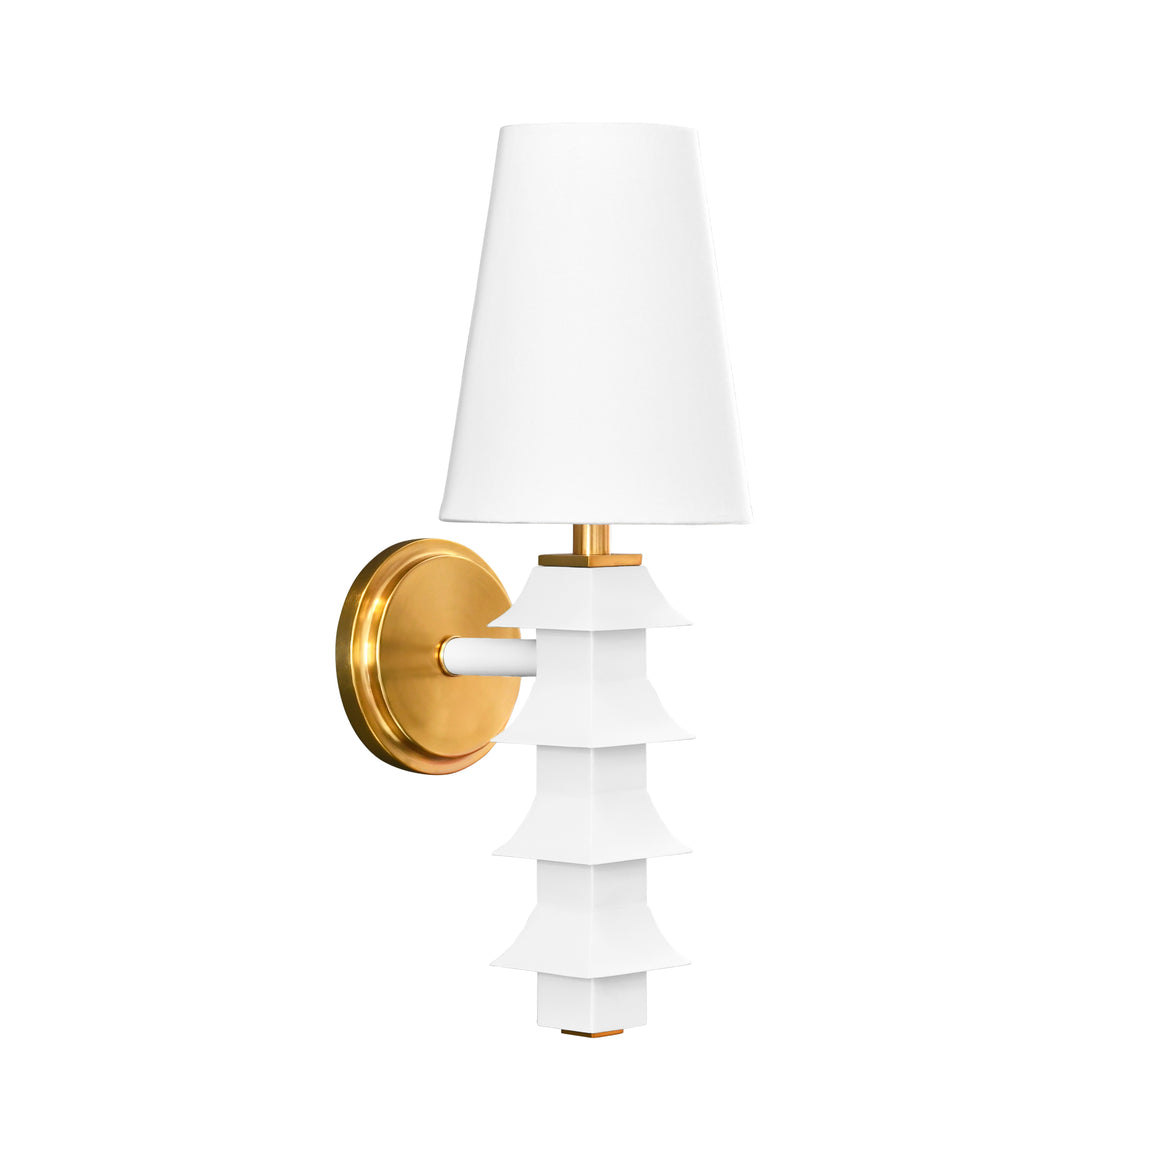 Handpainted Tole Pagoda Sconce in White